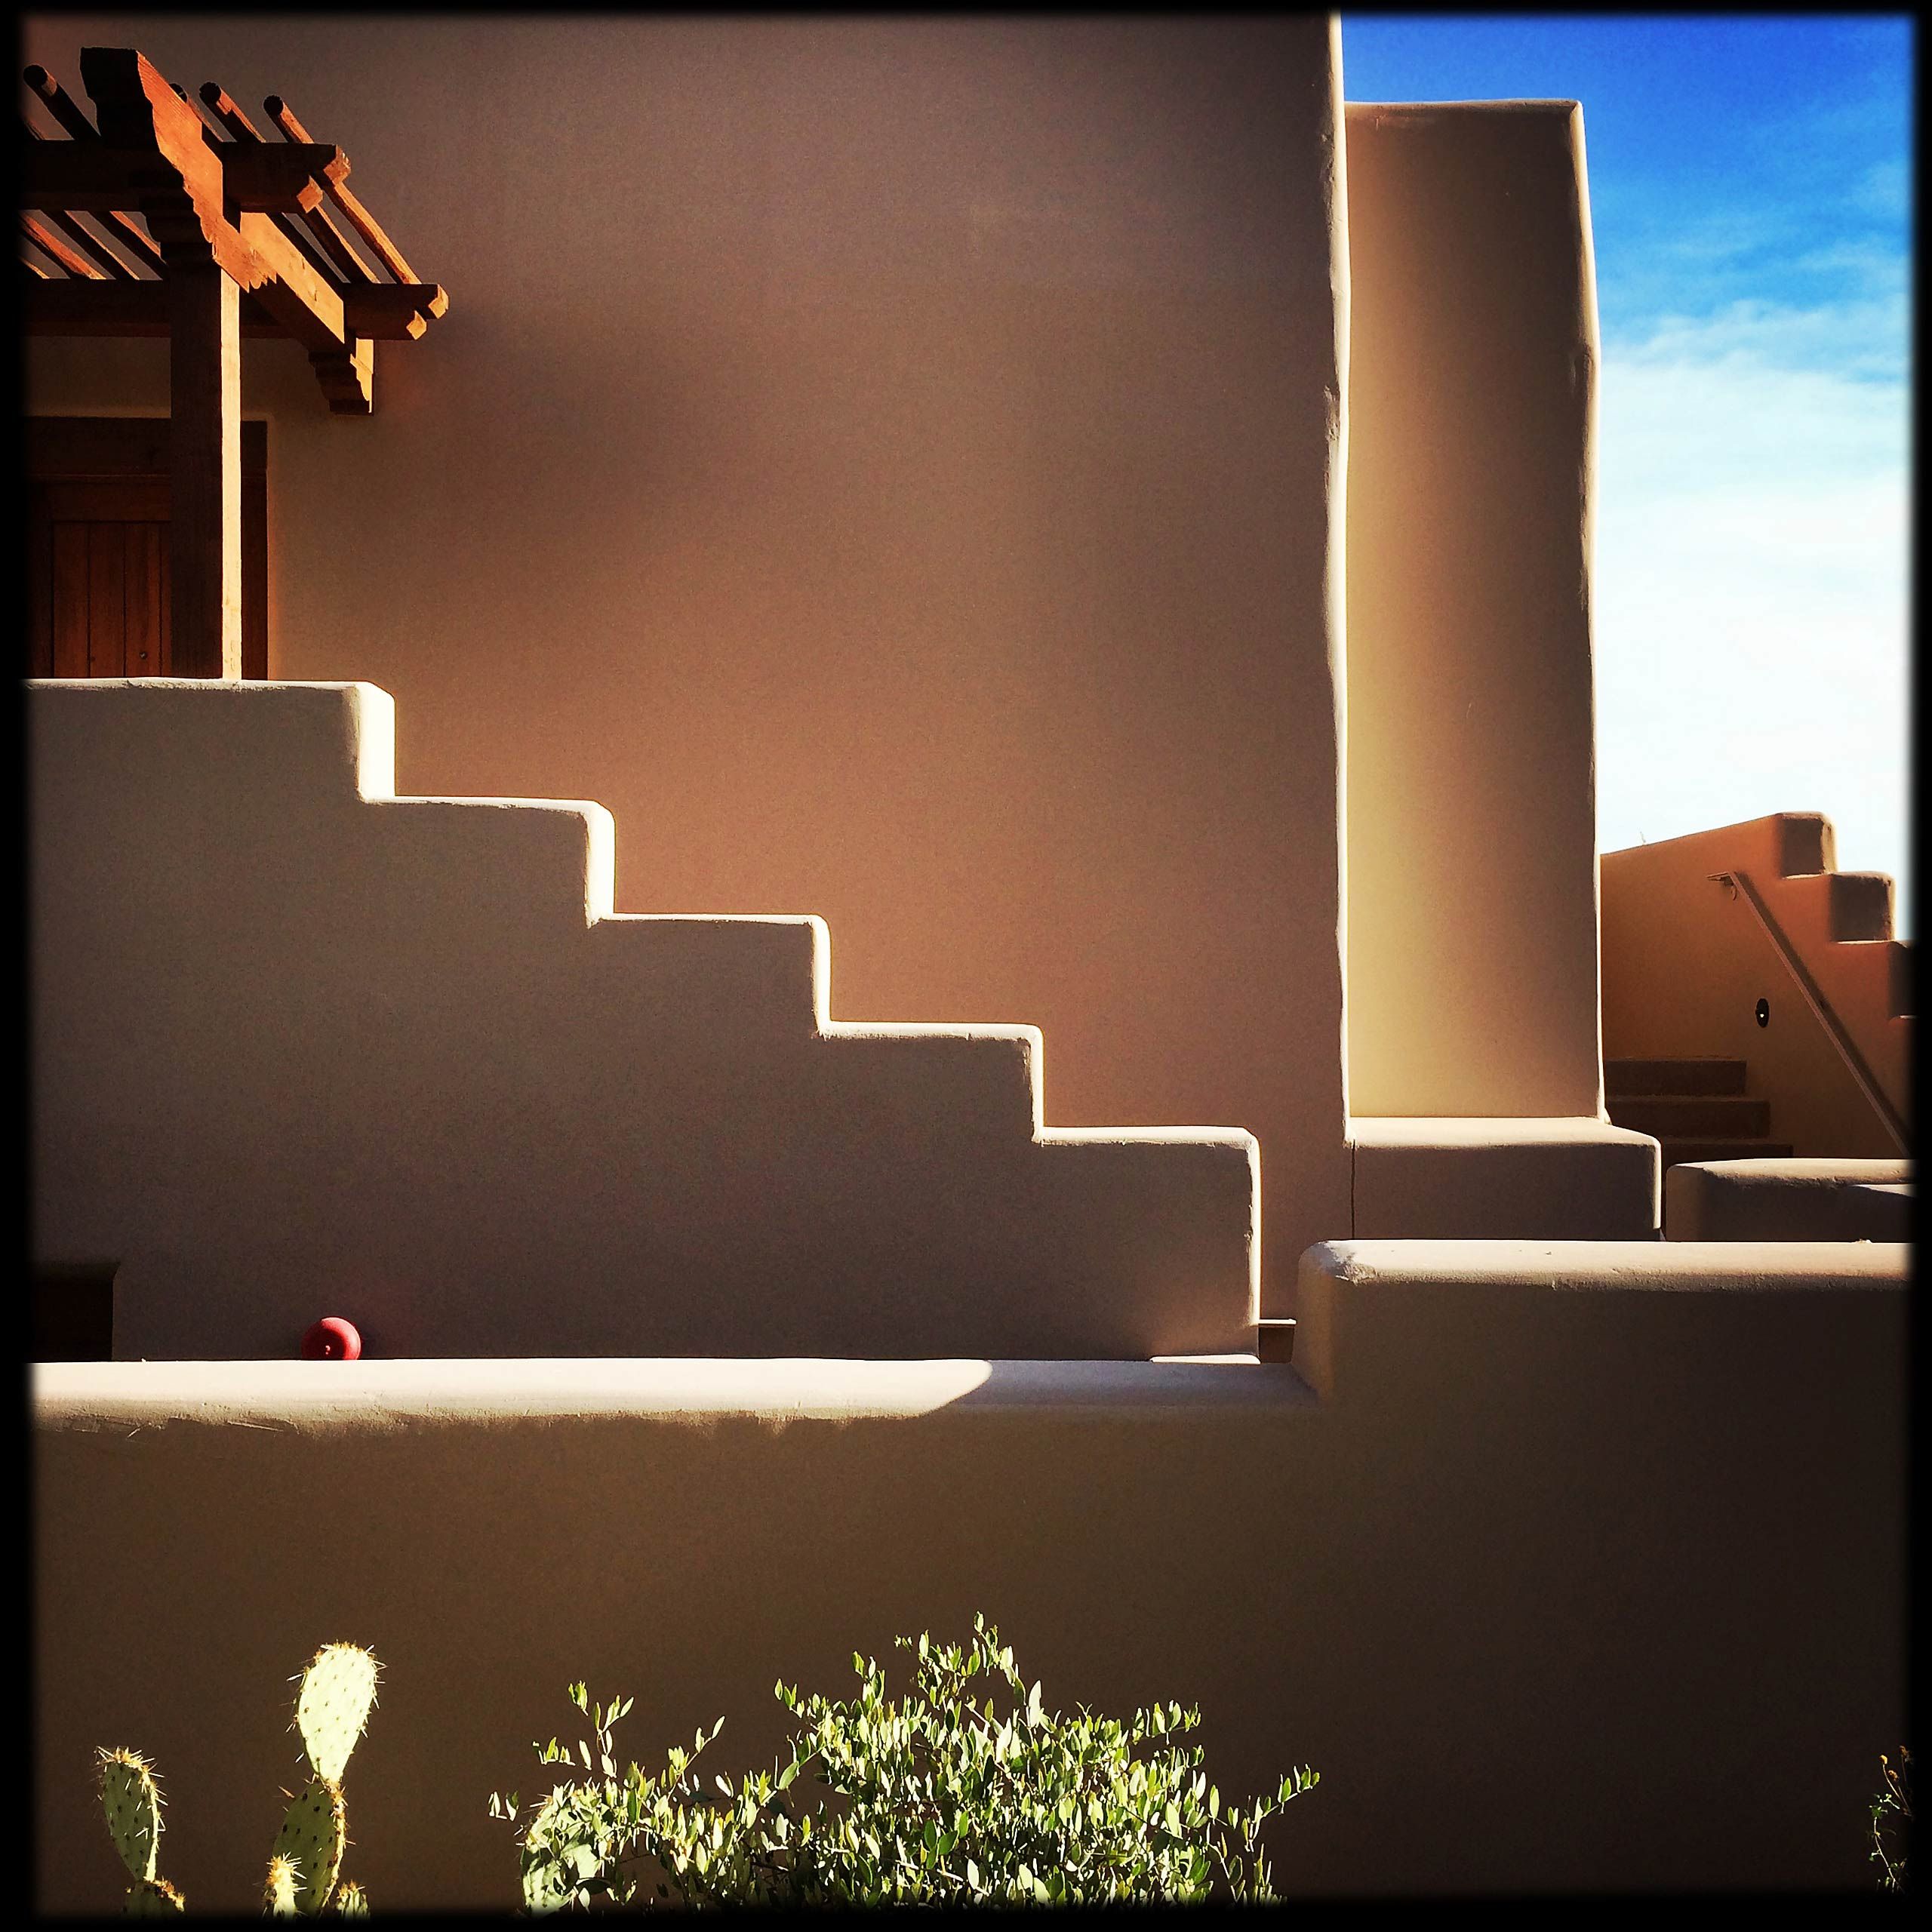 Light sculpted adobe buildings in Arizona one of my favorite photographs 